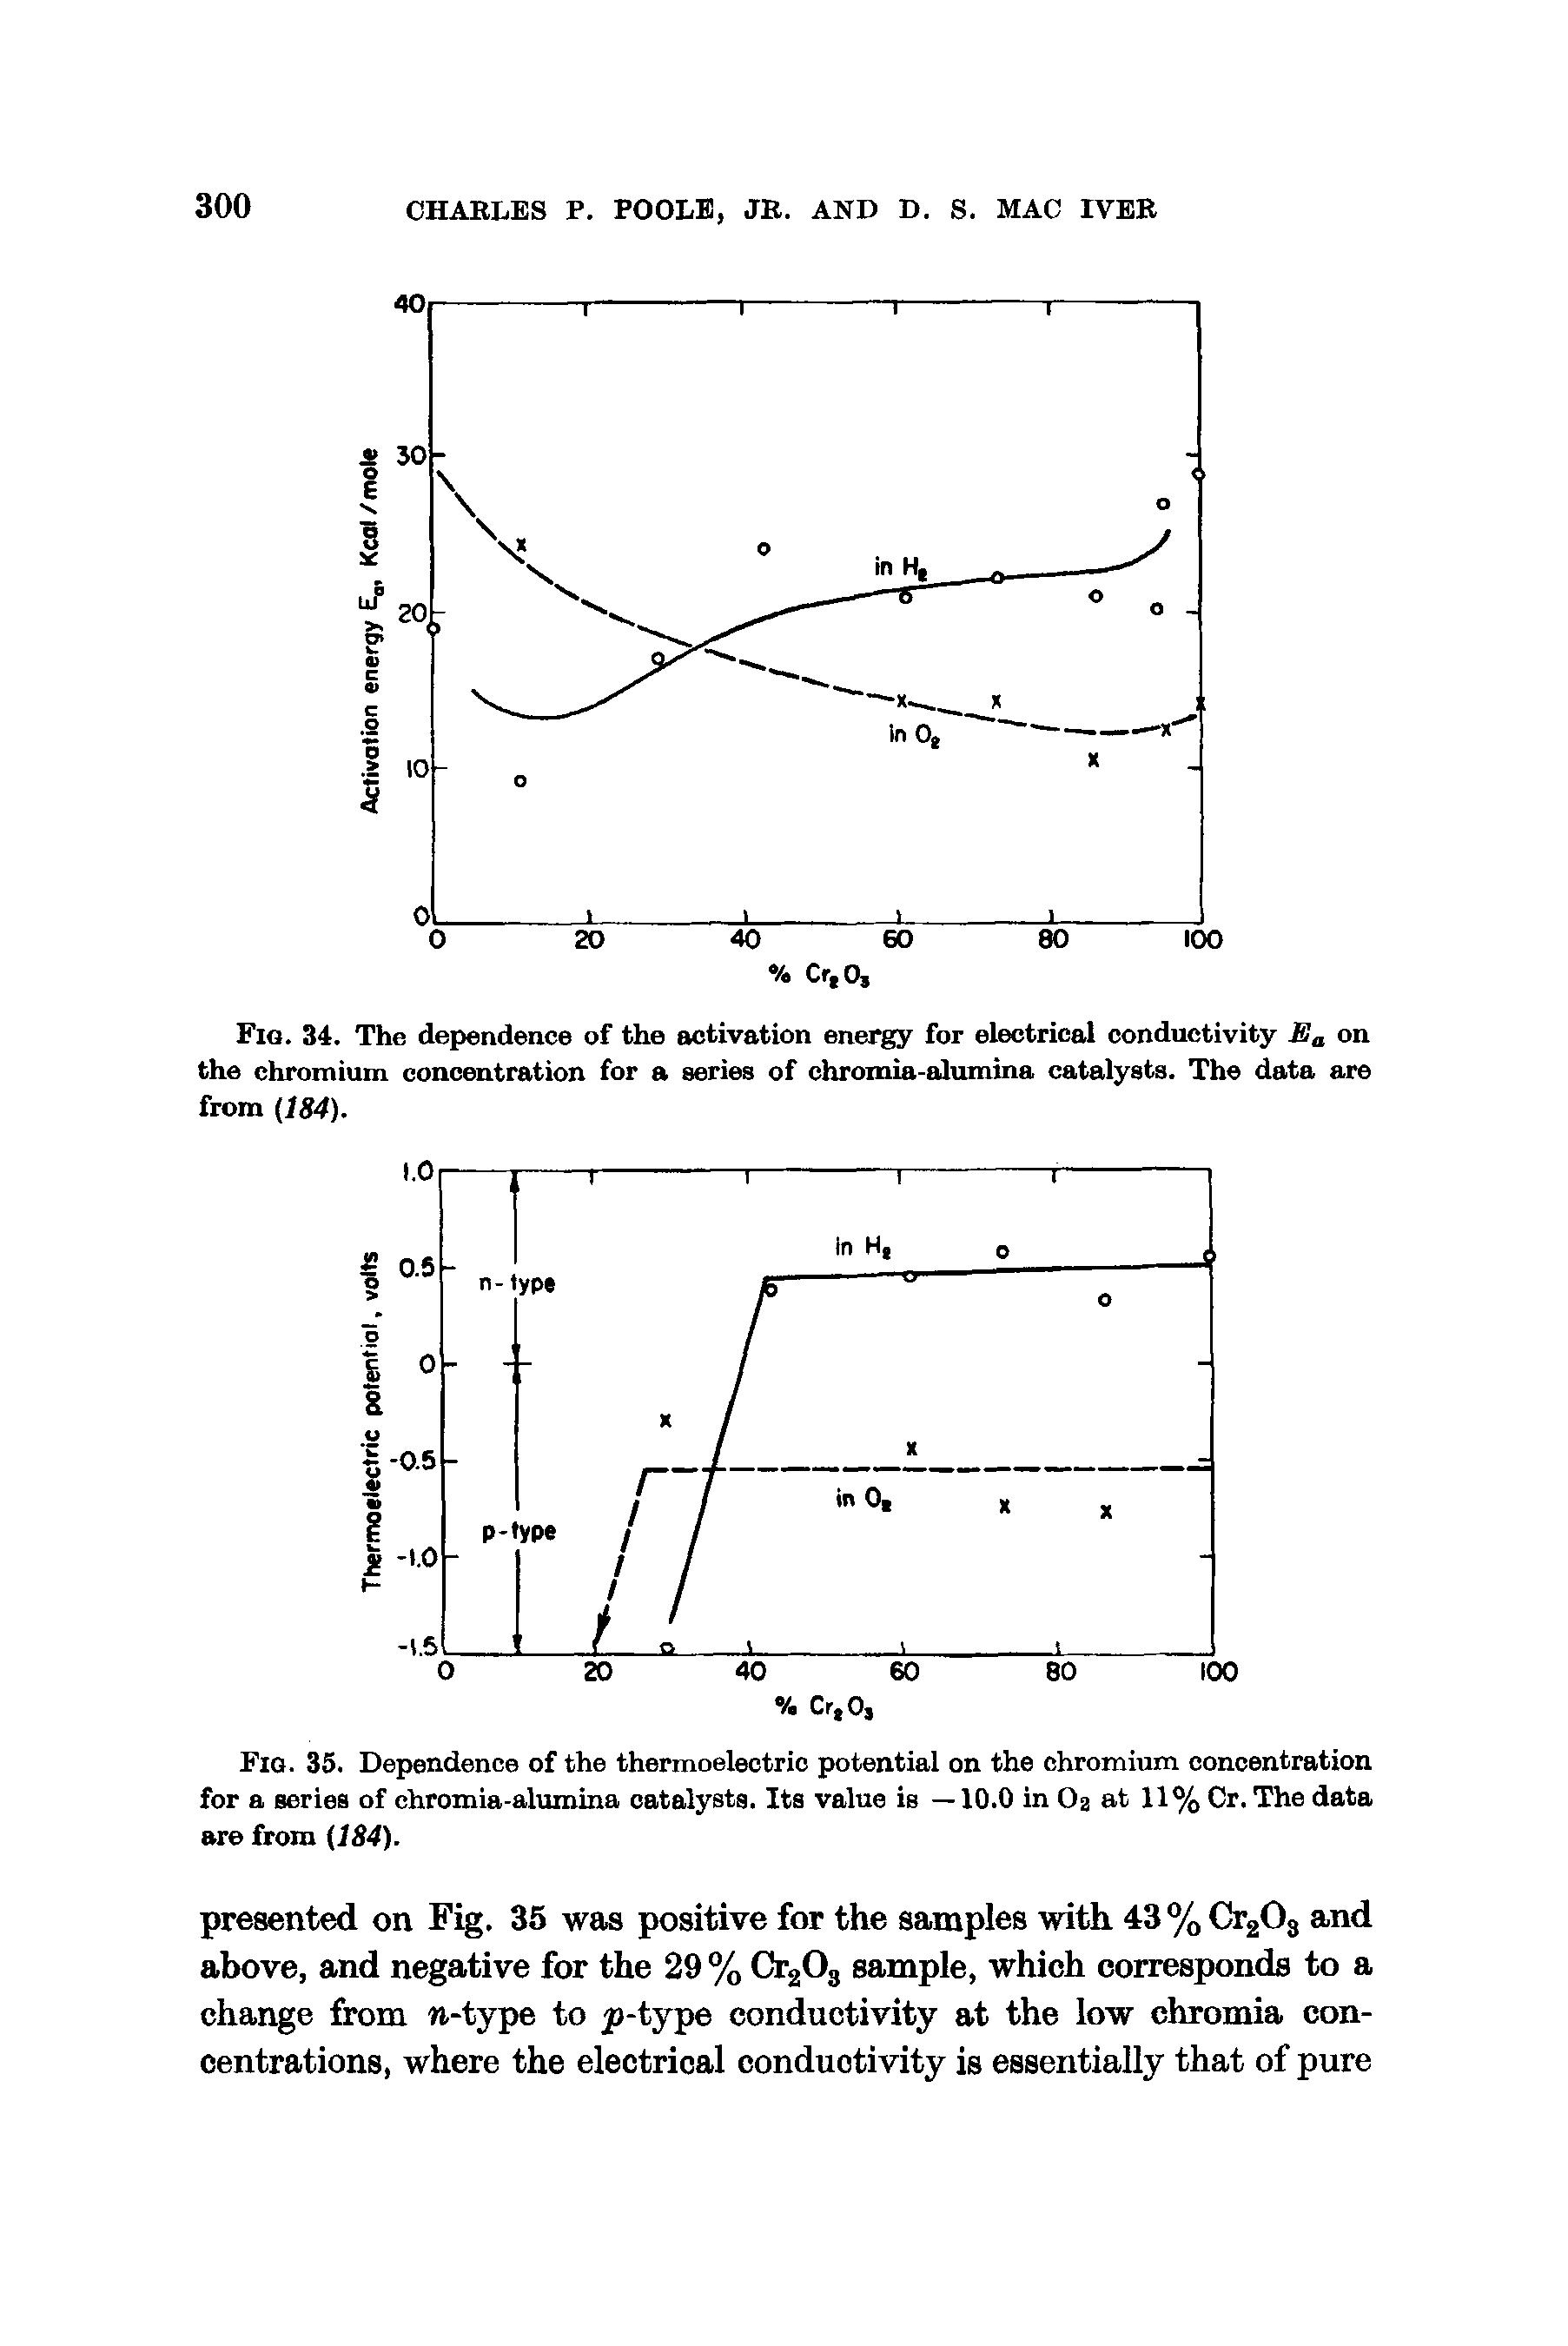 Fig. 35. Dependence of the thermoelectric potential on the chromium concentration for a series of chromia-alumina catalysts. Its value is —10.0 in Oa at 11% Or. The data are from 184).